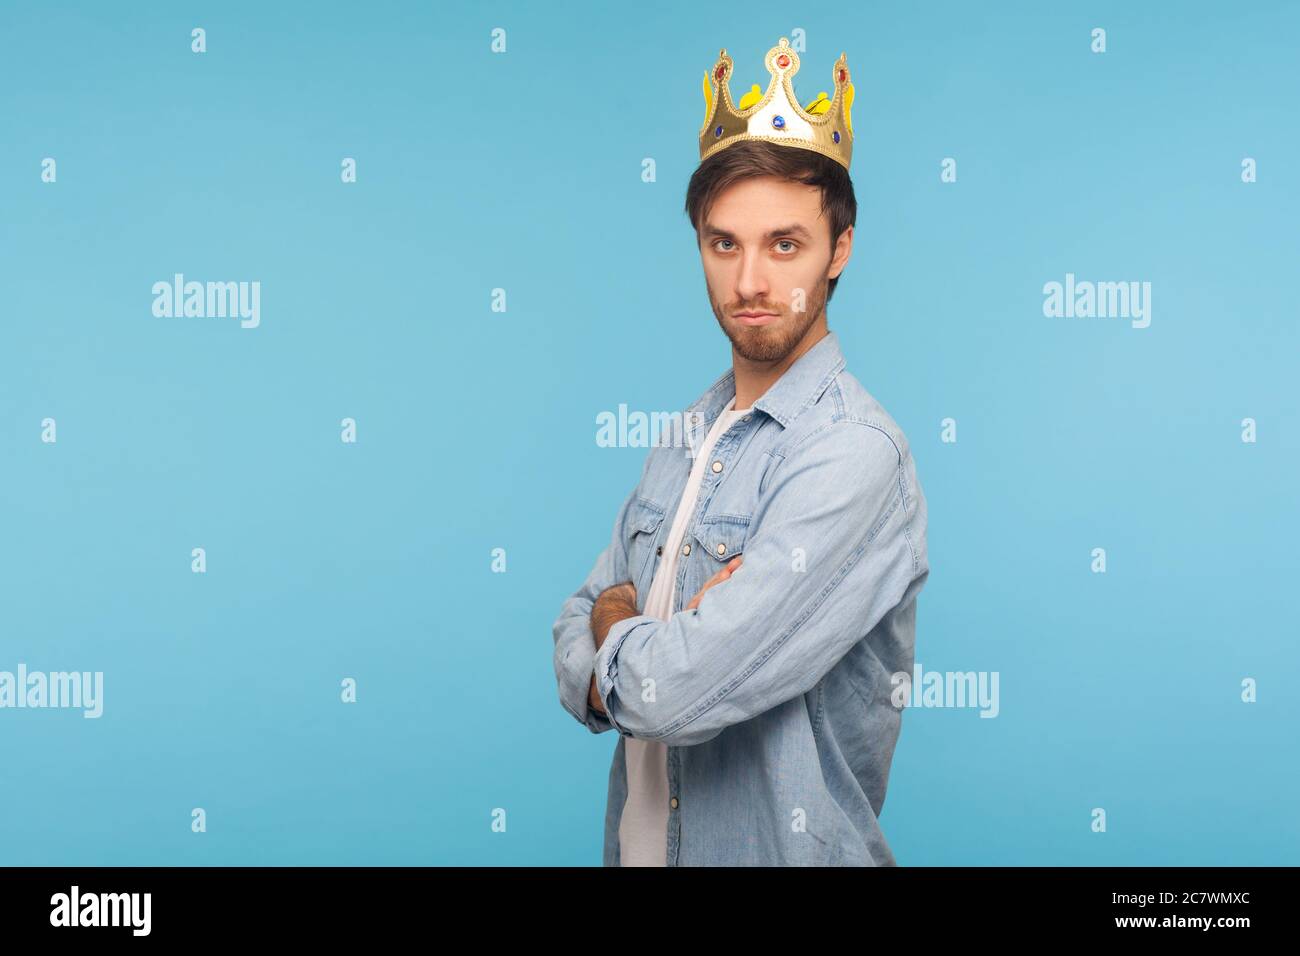 I'm king! Portrait of confident ambitious man wearing golden crown, looking with arrogance, declaring his authority and leadership, superior privilege Stock Photo